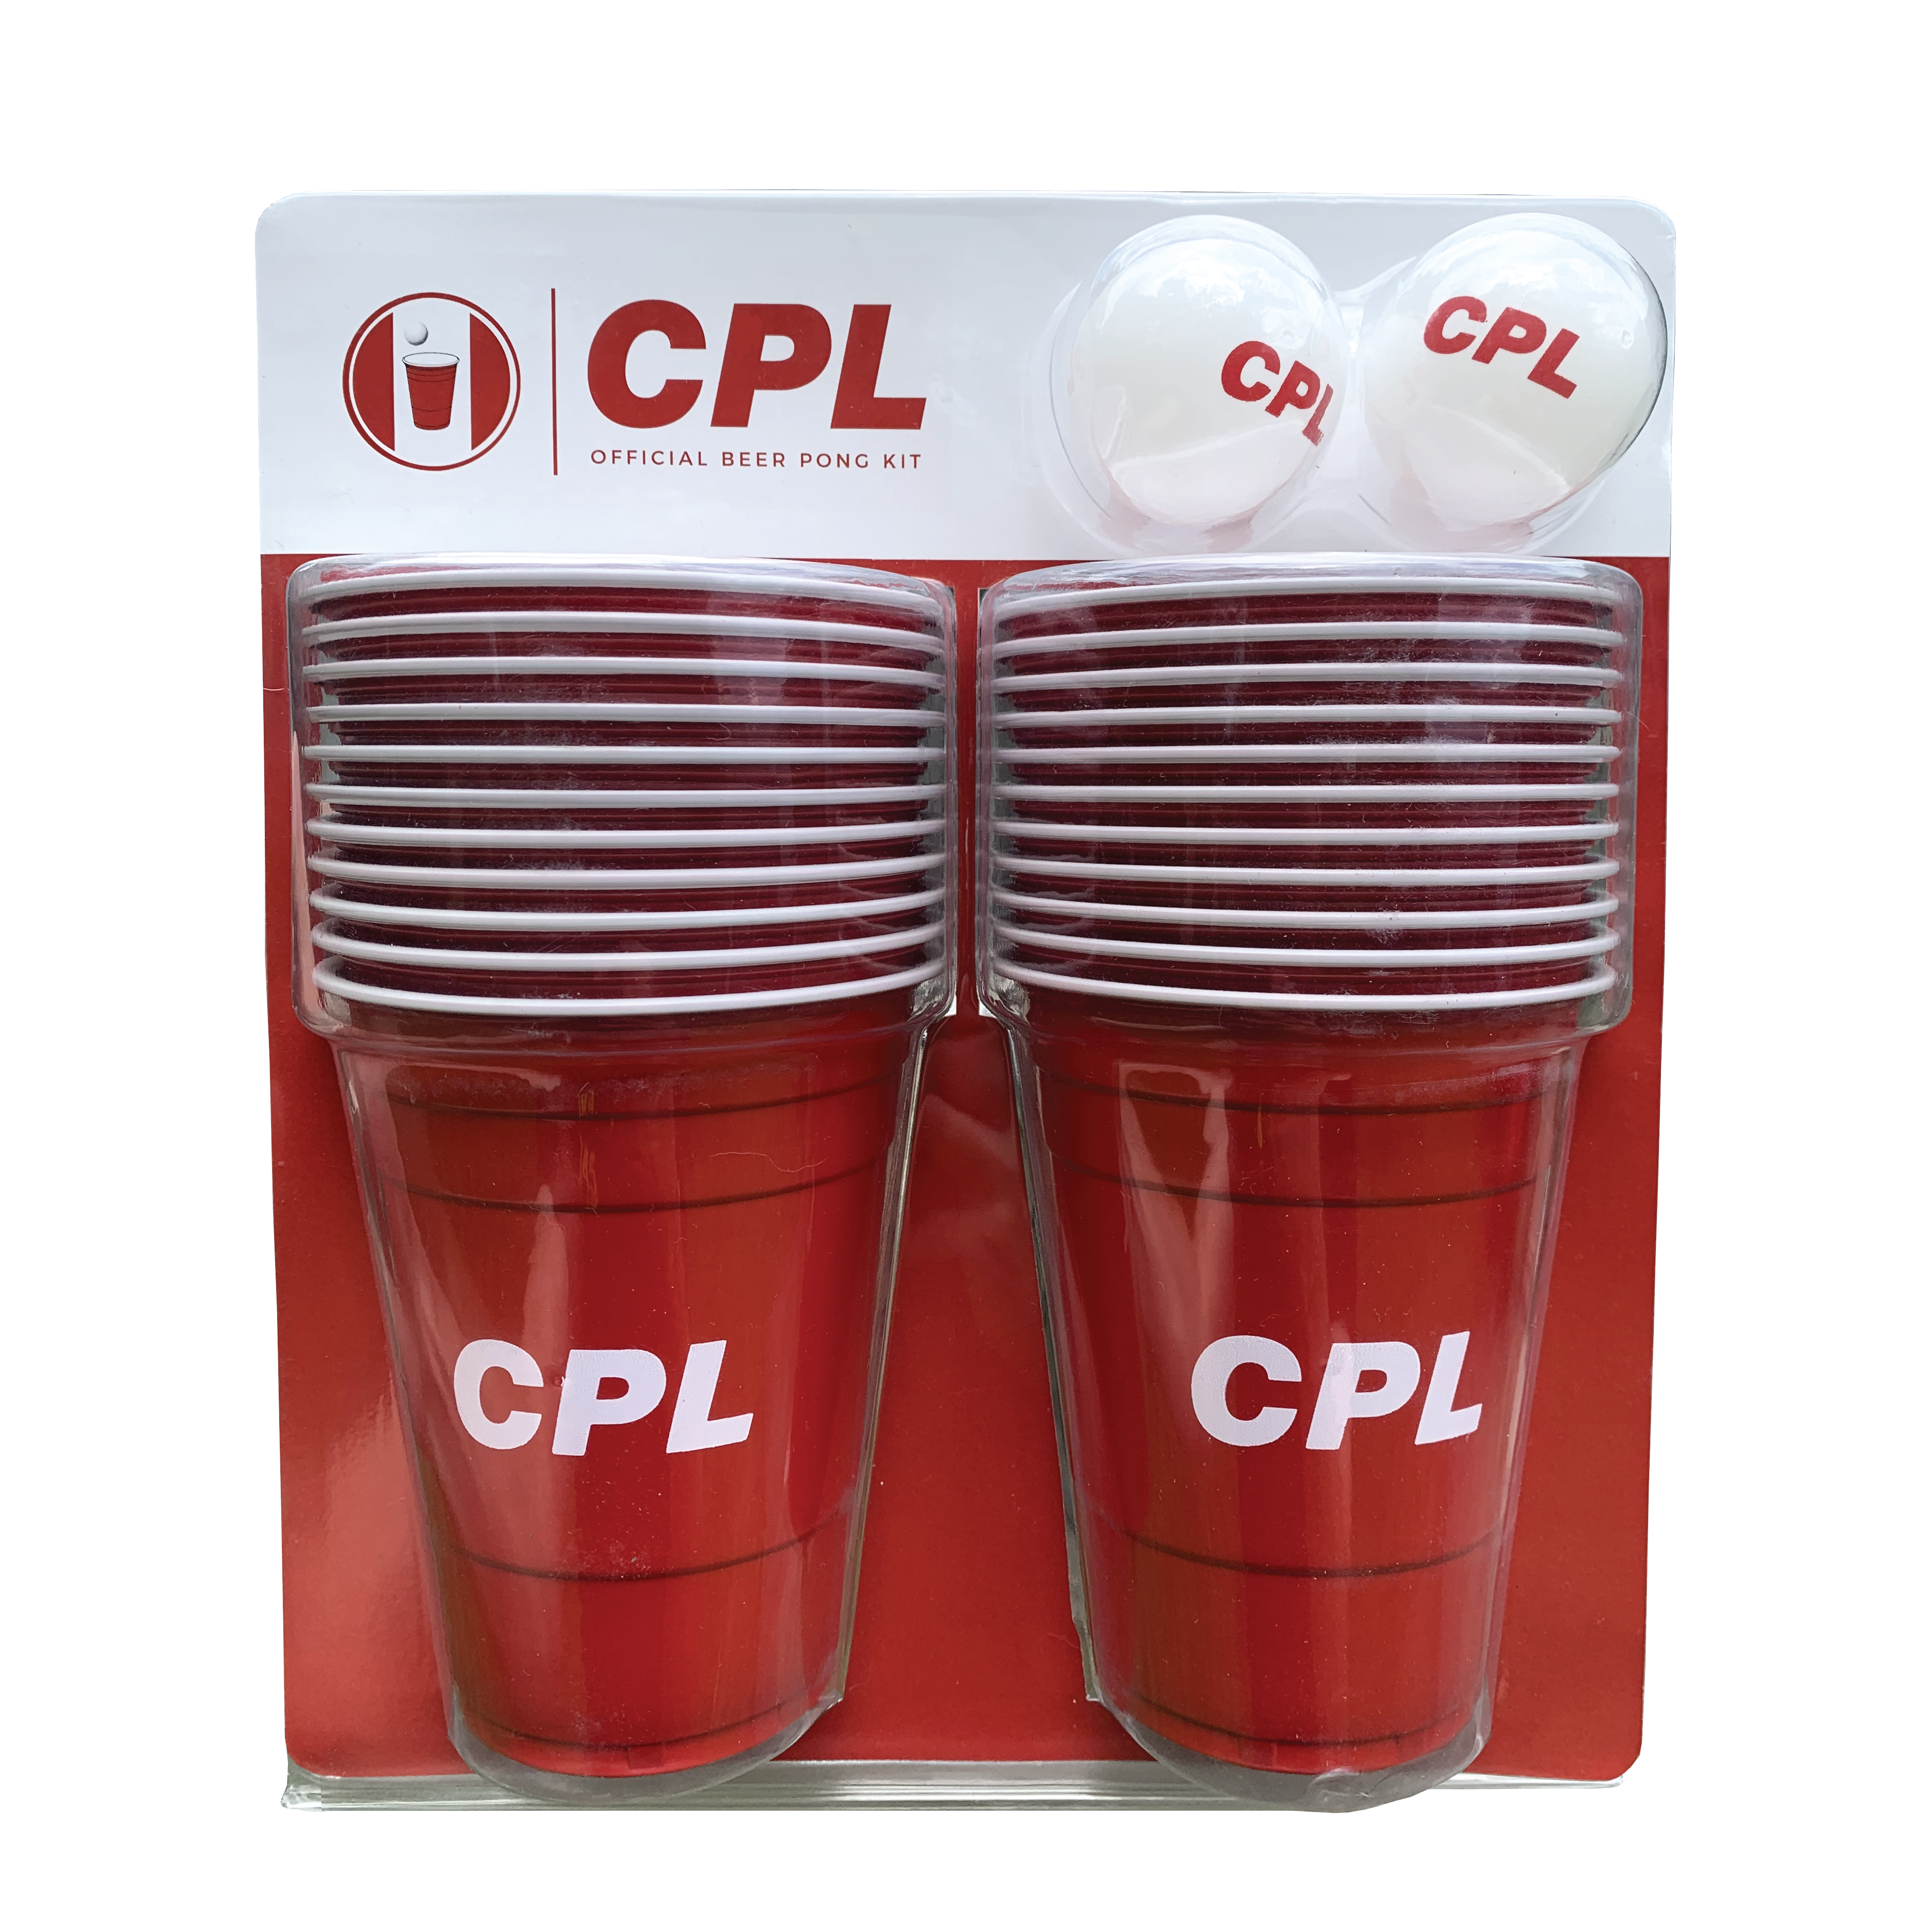 CPL Official Beer Pong Kit